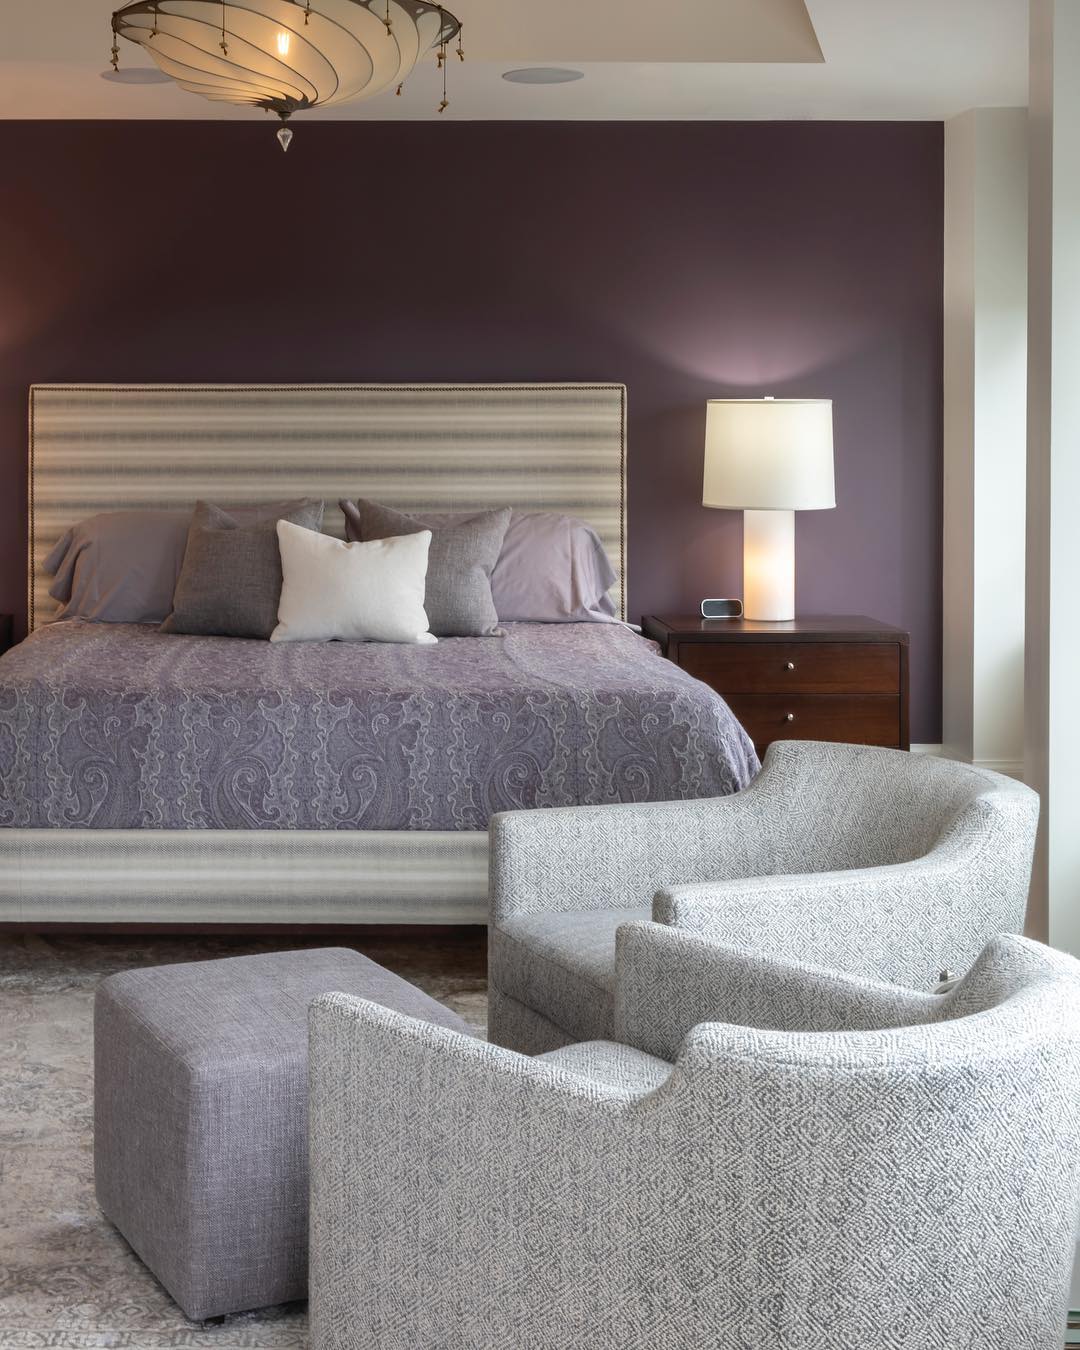 Plum accent wall in a room with a lavender bed and light gray chairs.